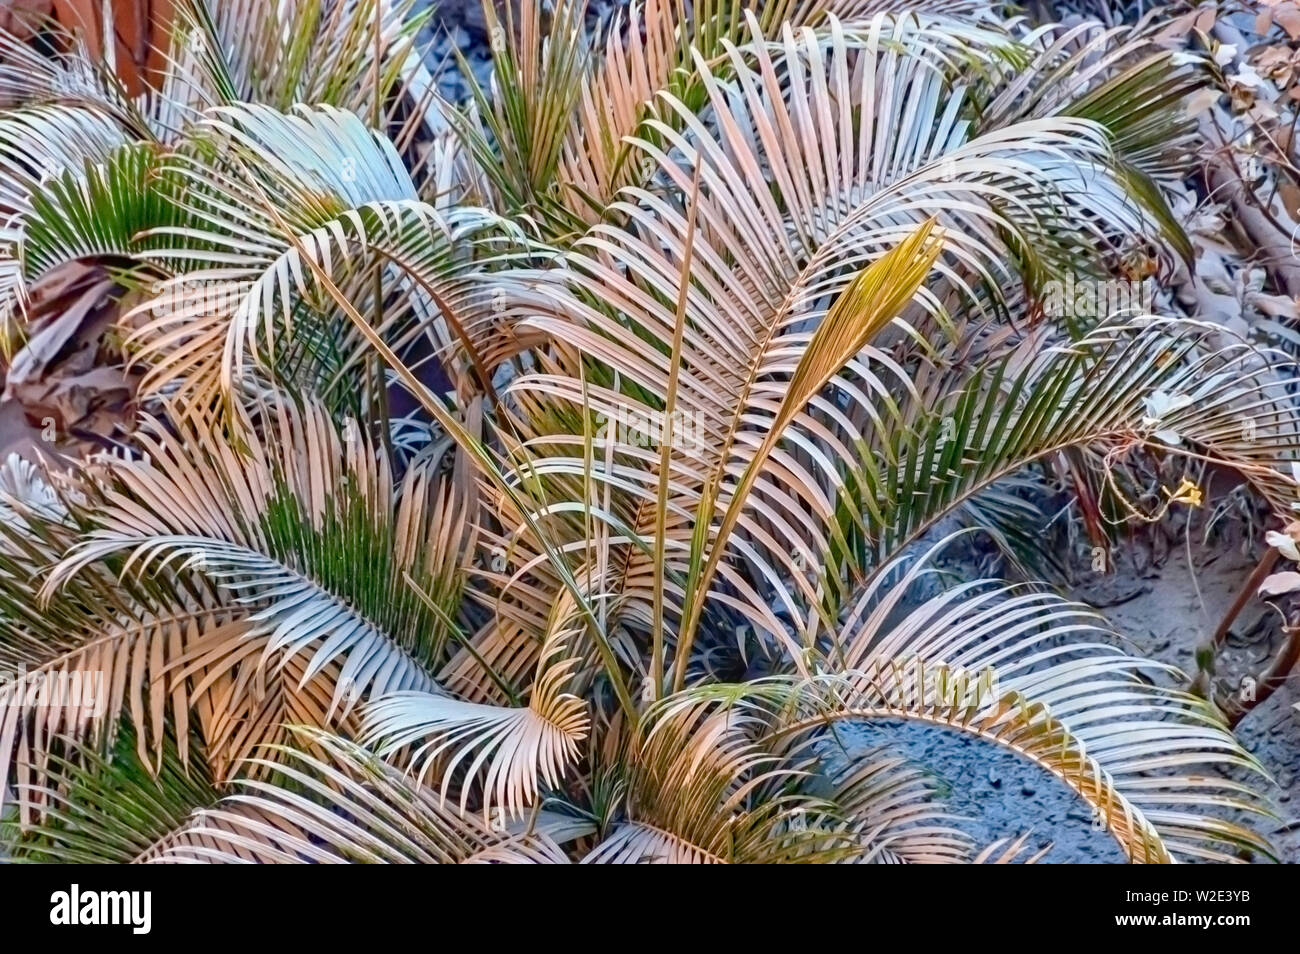 The leaves of a Cycad plant covered in a layer of fine dust due to well drilling nearby, to locate and extract ground water. Hyderabad, India. Stock Photo